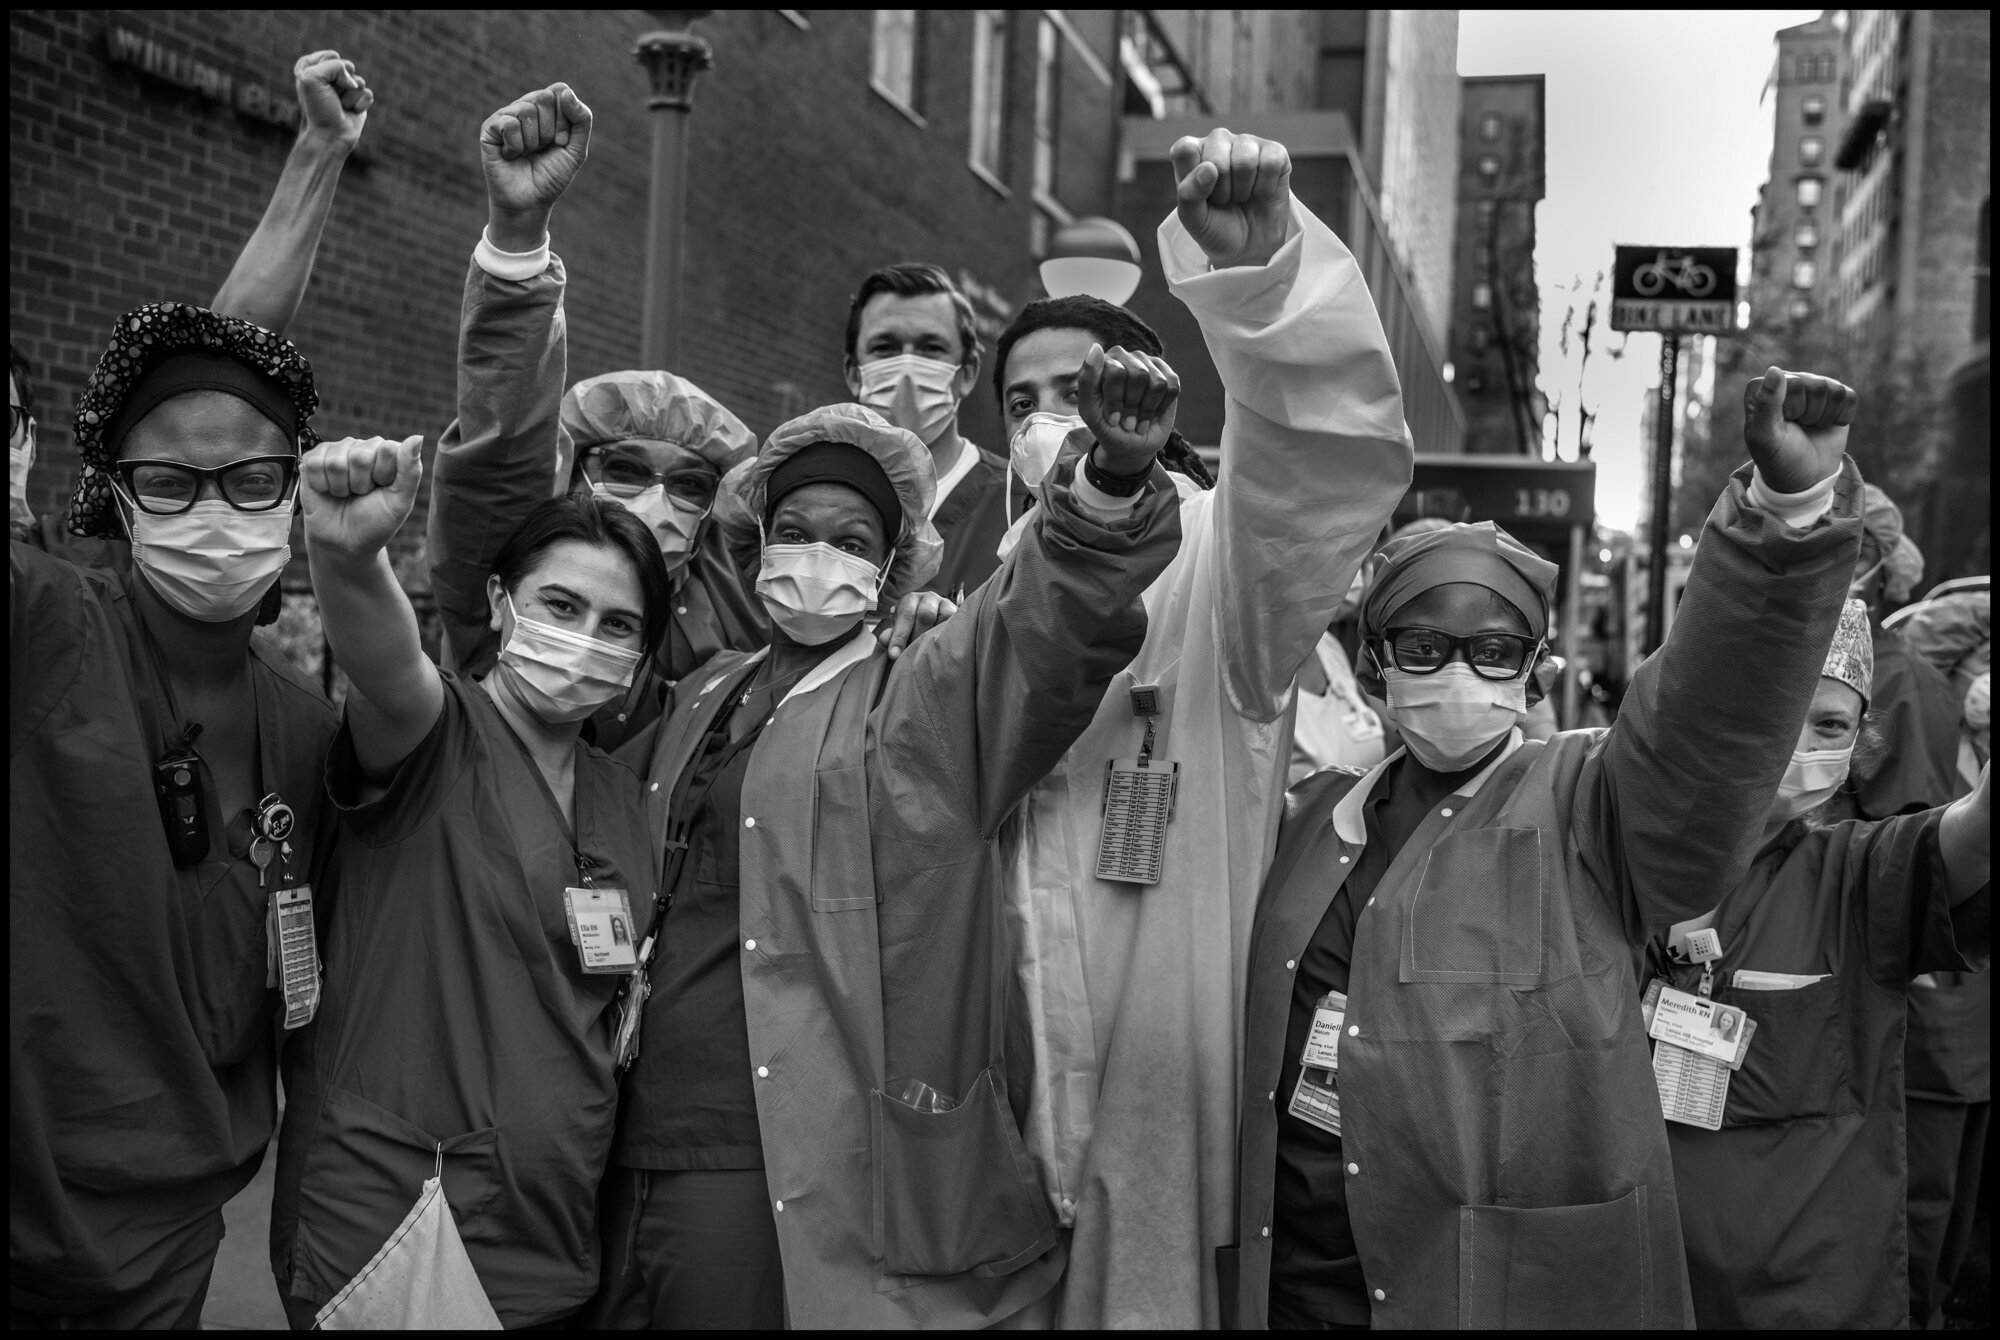  A group of ICU nurses from Lenox Hill Hospital.   May 3, 2020. © Peter Turnley.   ID# 36-003 